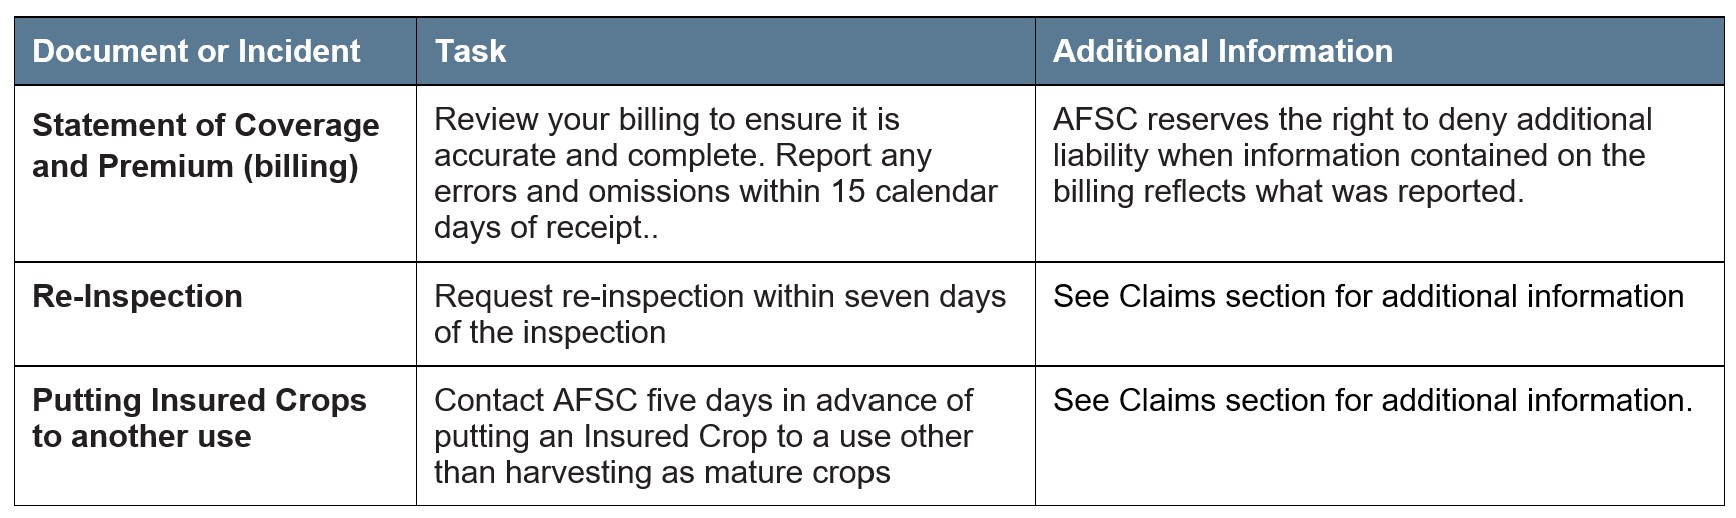 Safflower and Sunflower Article 4 Other Deadlines. Call AFSC for details